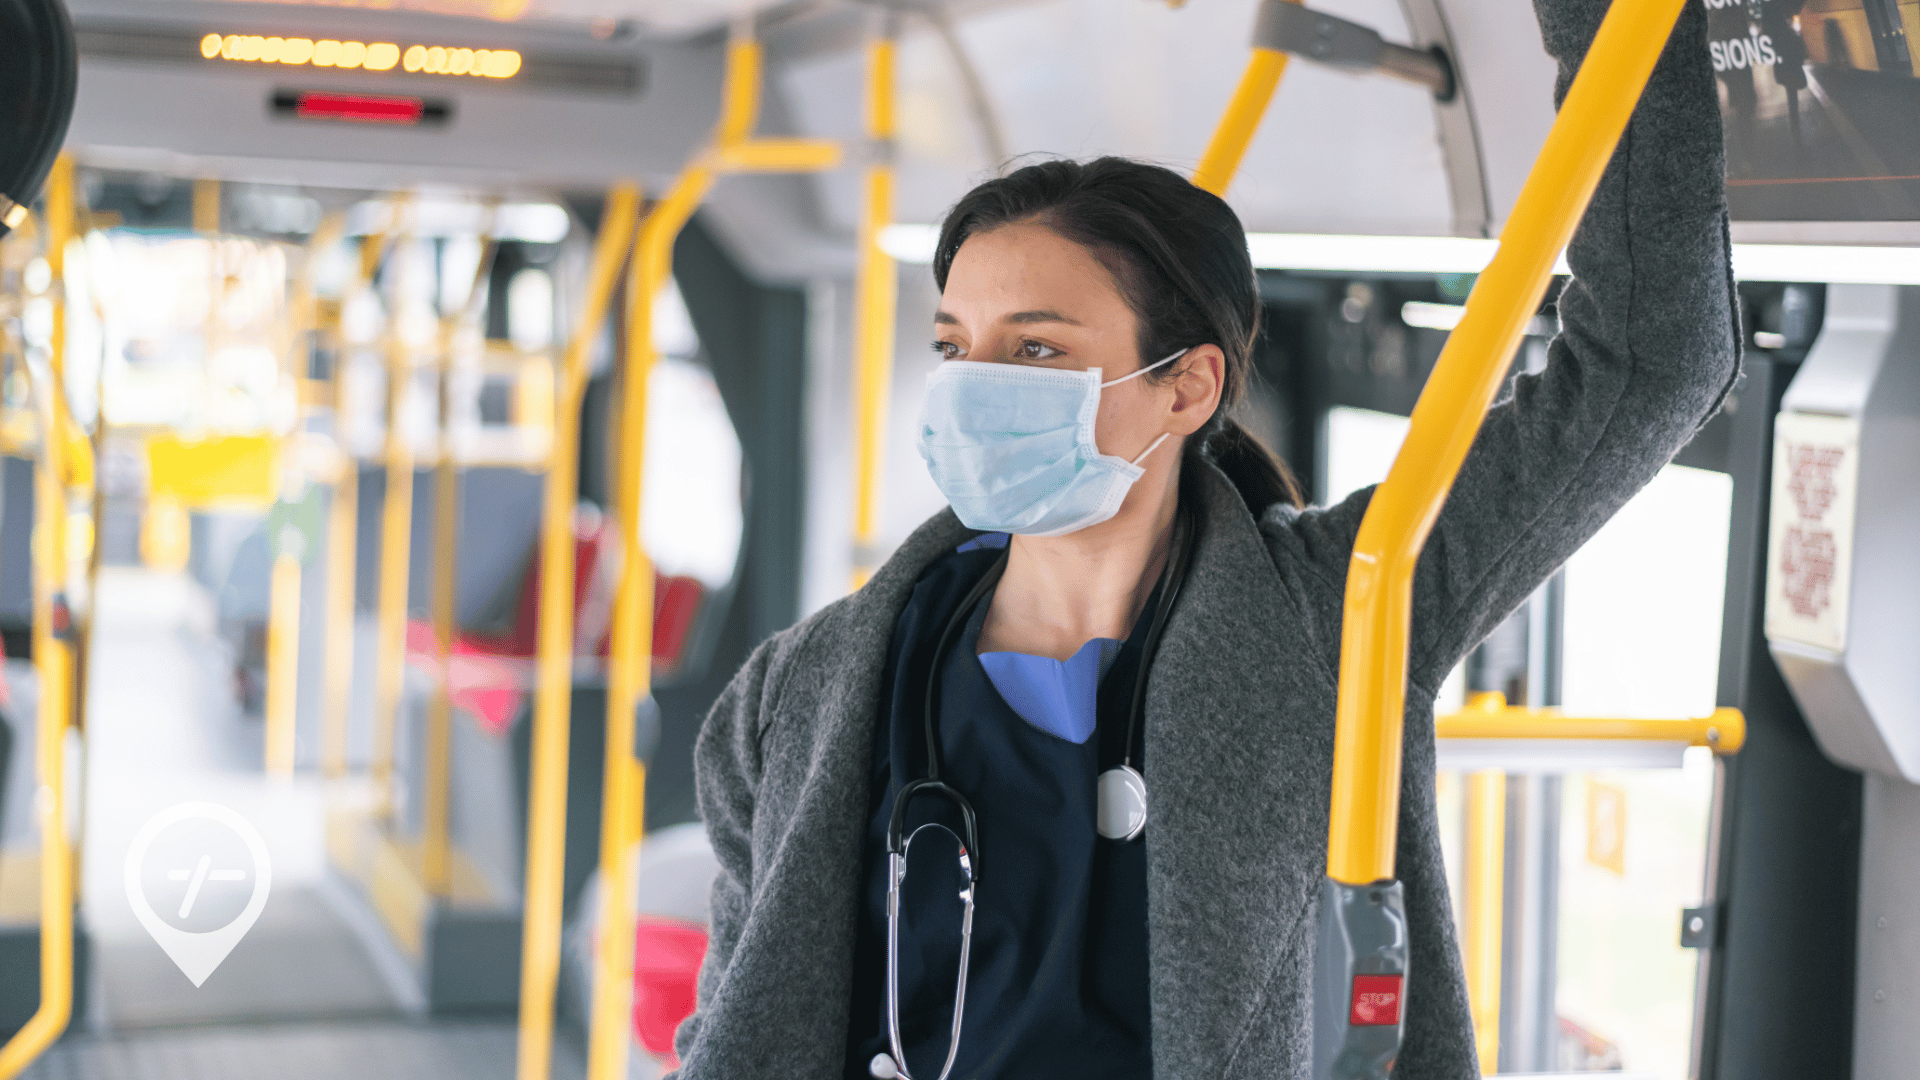 A nurse wearing a mask stares out the window as she commutes to work by bus.